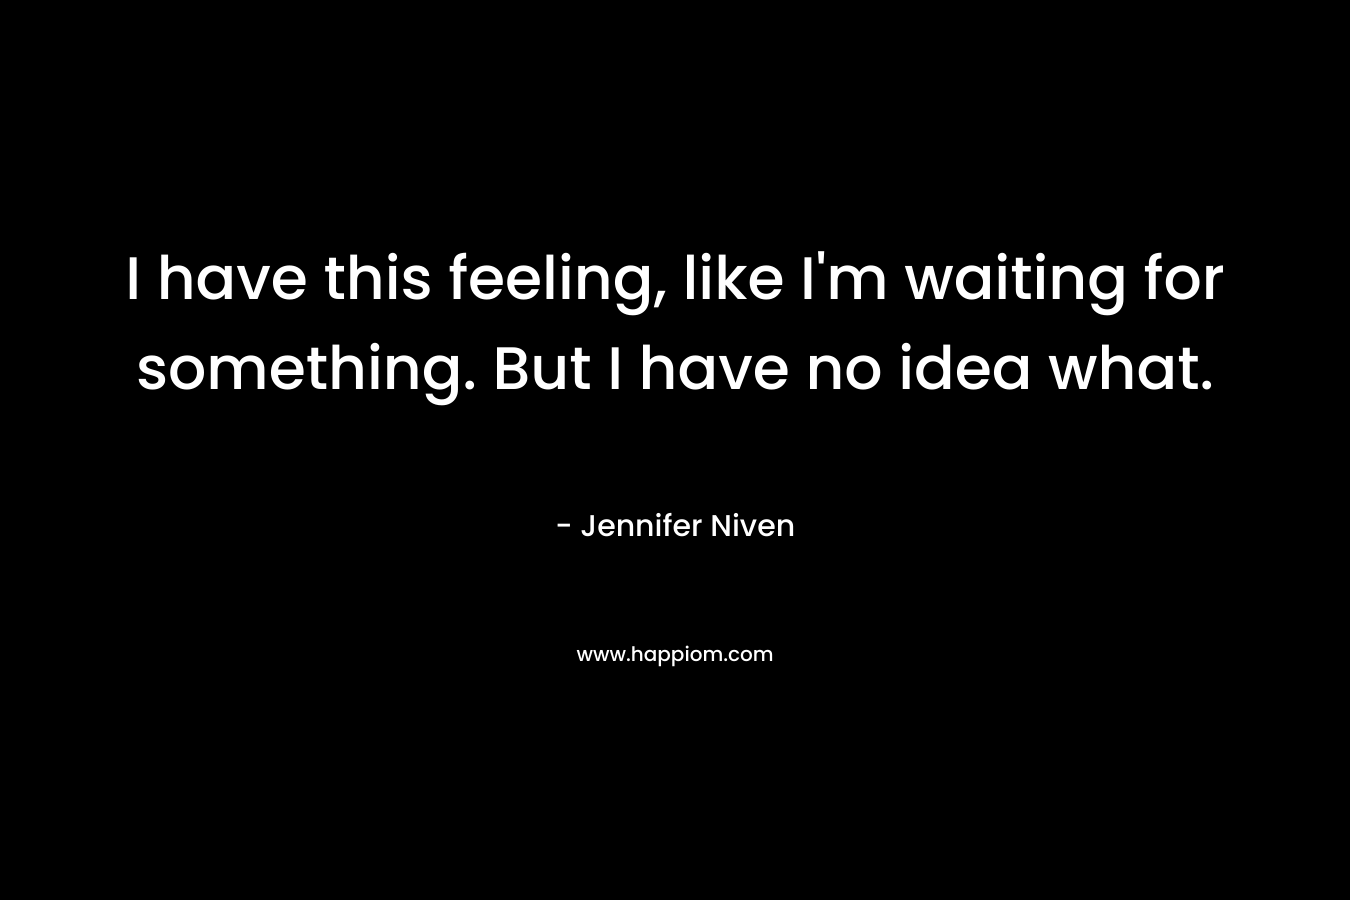 I have this feeling, like I’m waiting for something. But I have no idea what. – Jennifer Niven